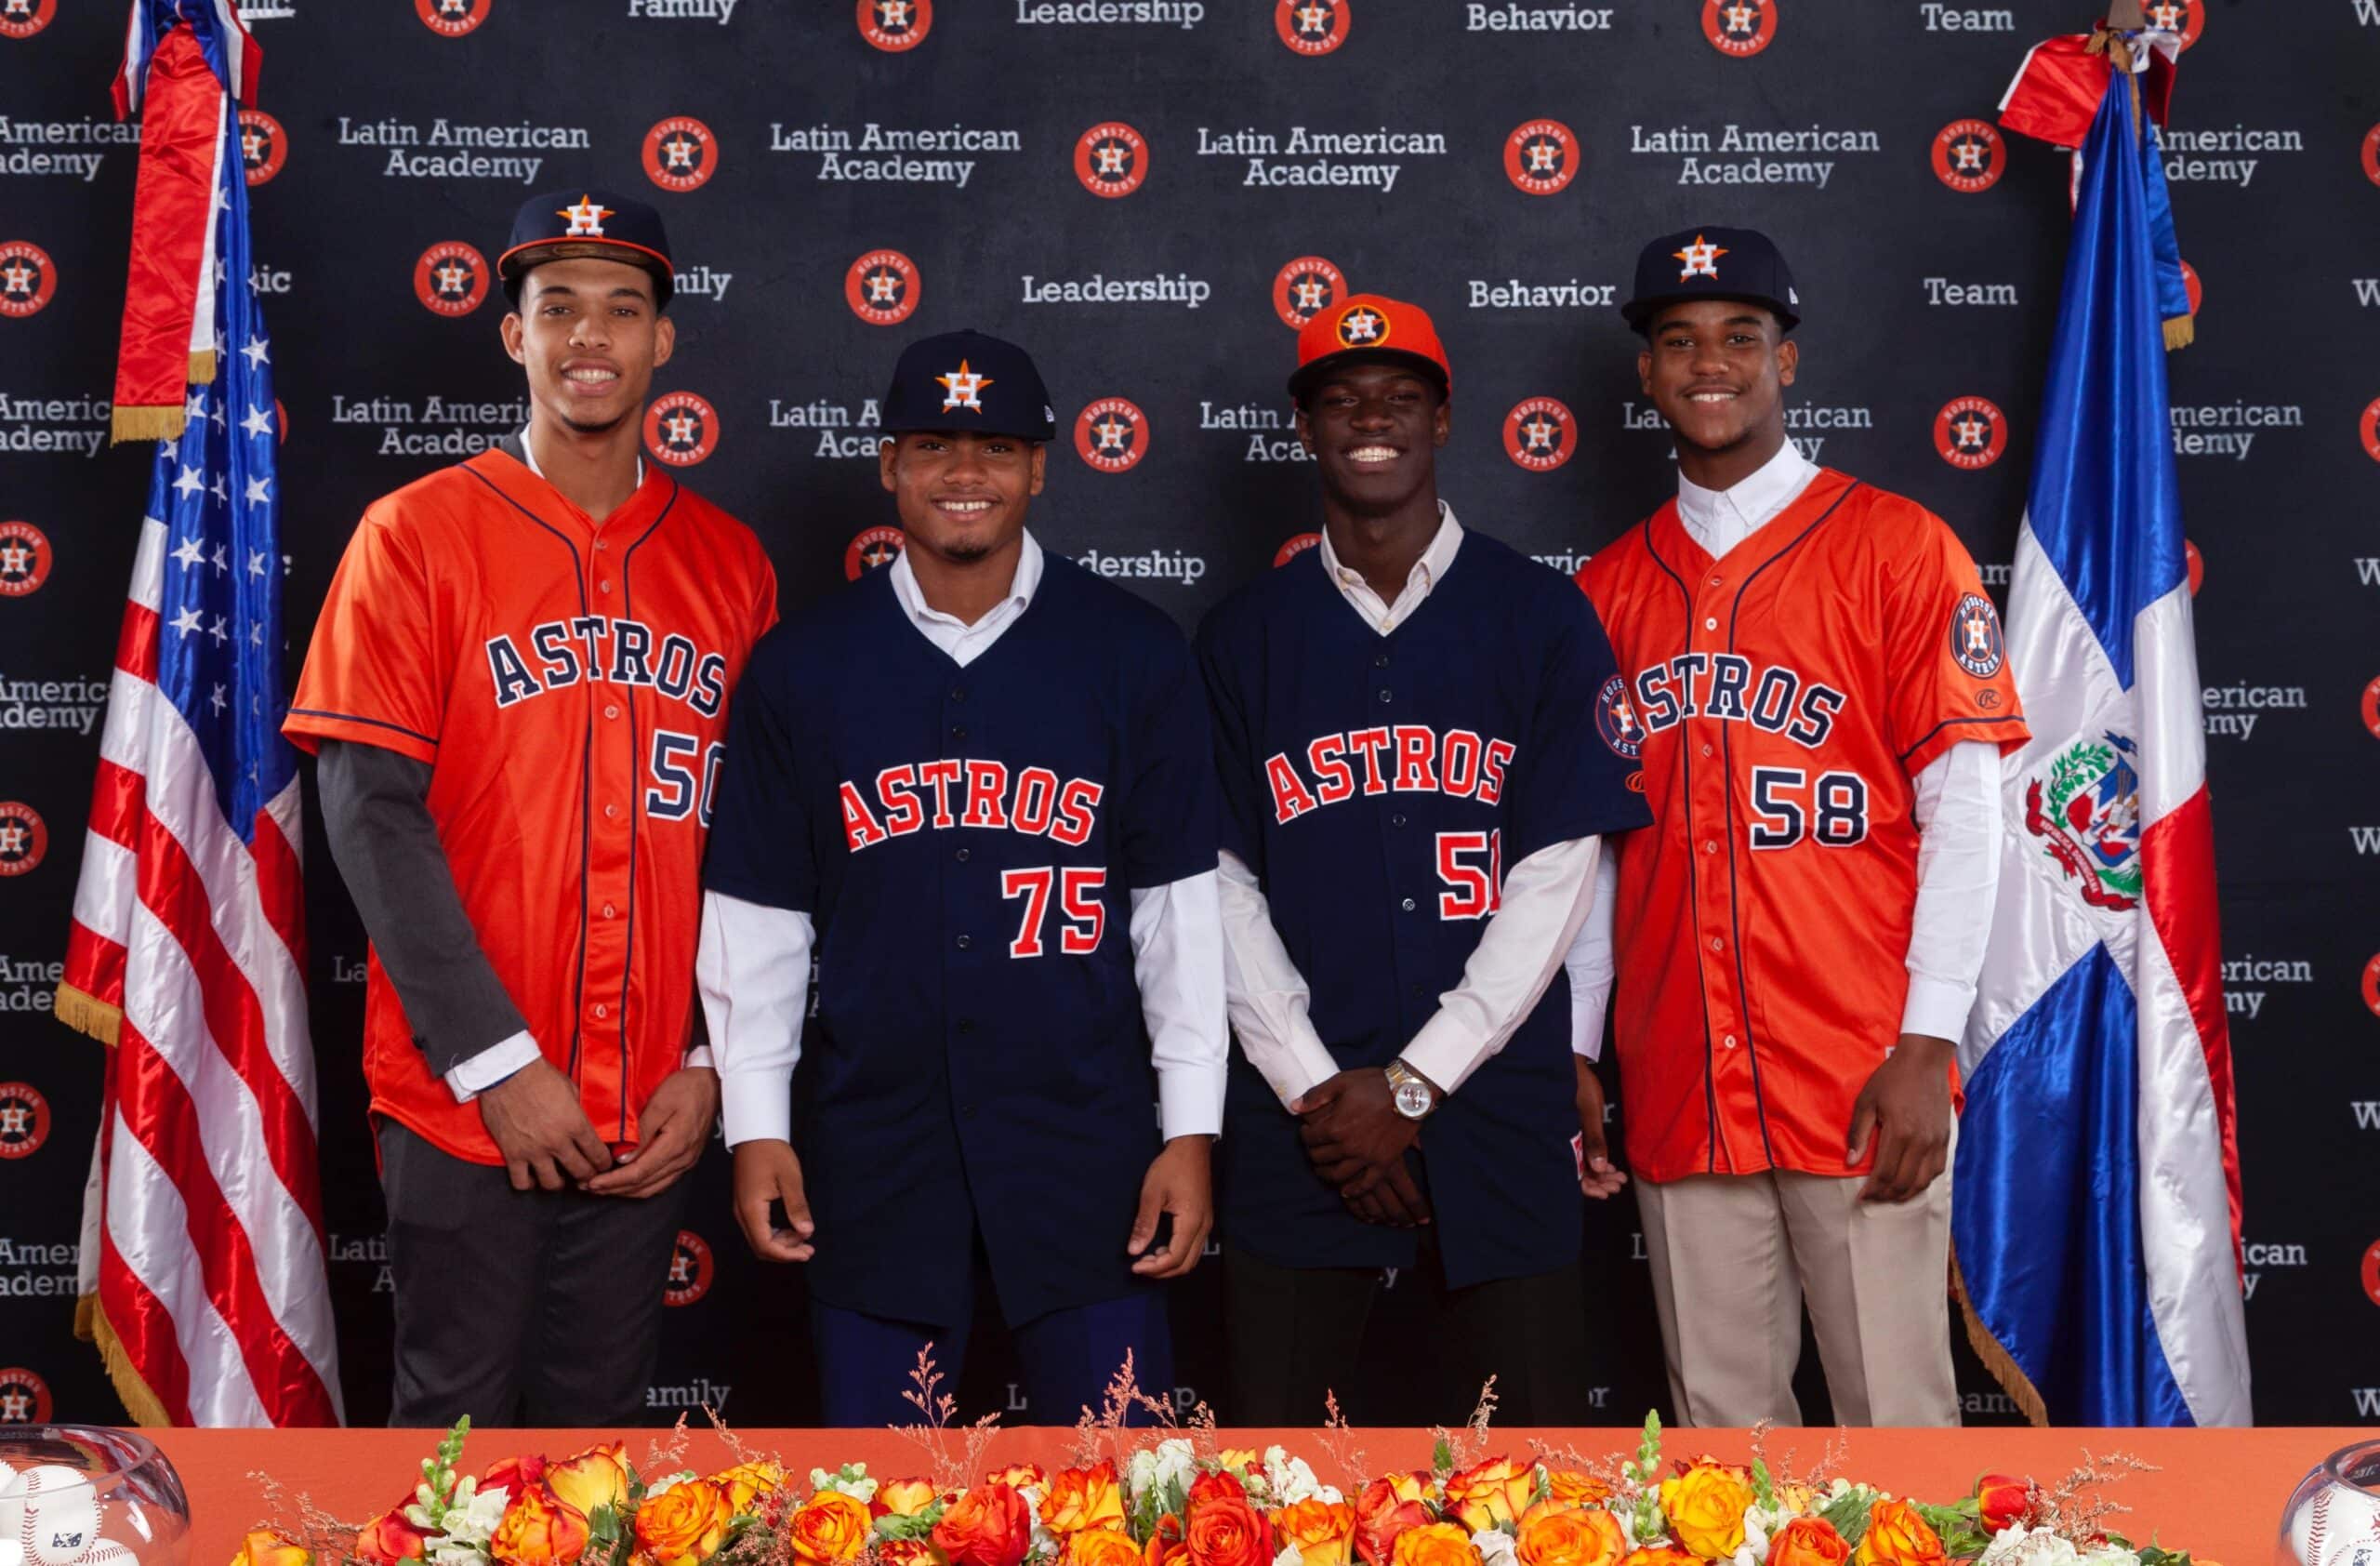 Houston Astros to Wear Gold on Opening Day 2023 – SportsLogos.Net News